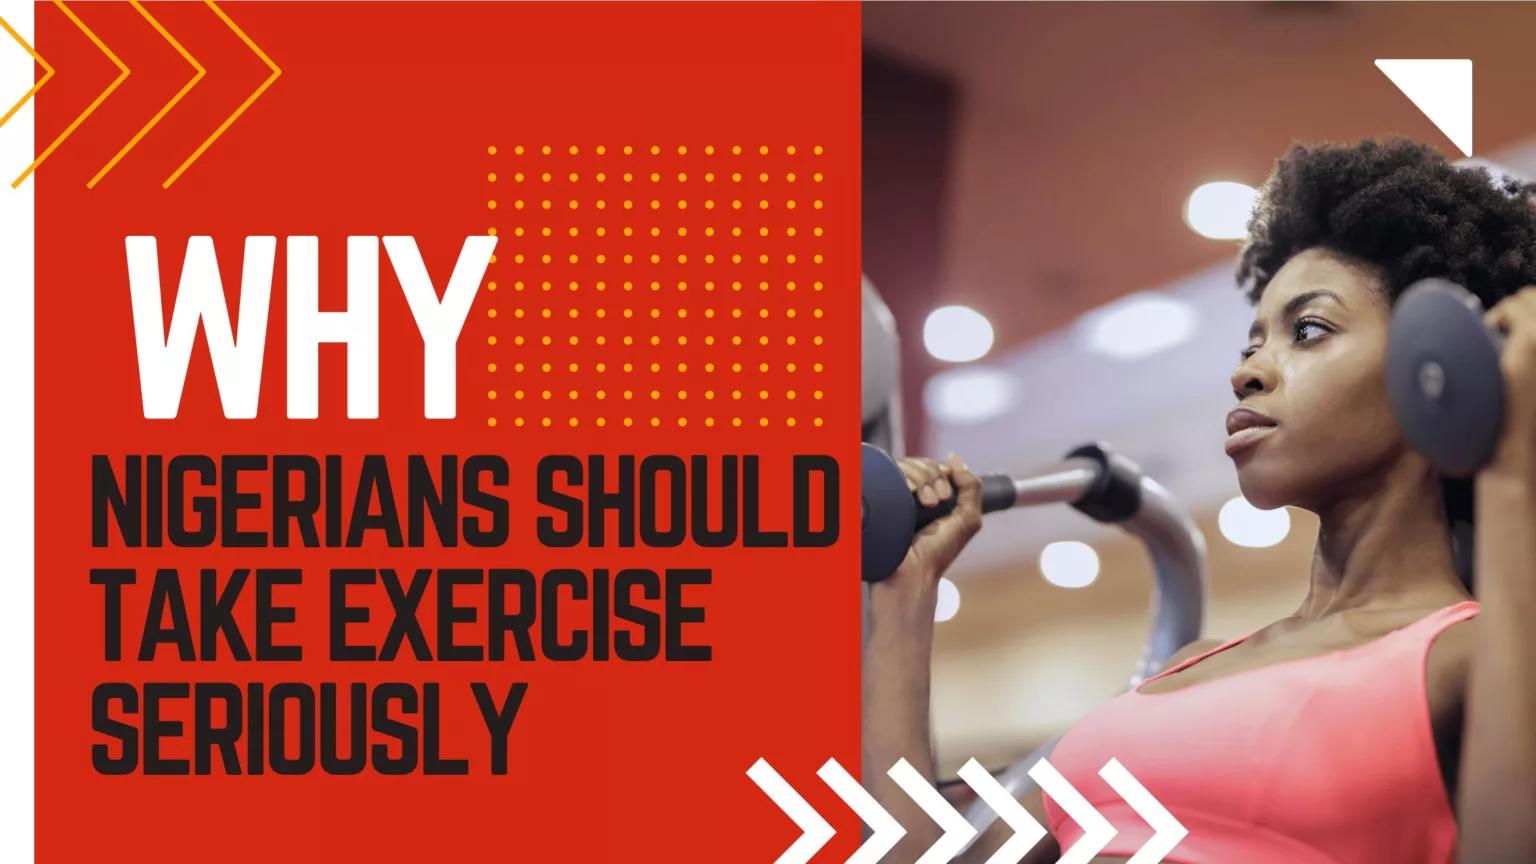 Softwareapp blog header 2 Why Nigerians should take Exercise seriously